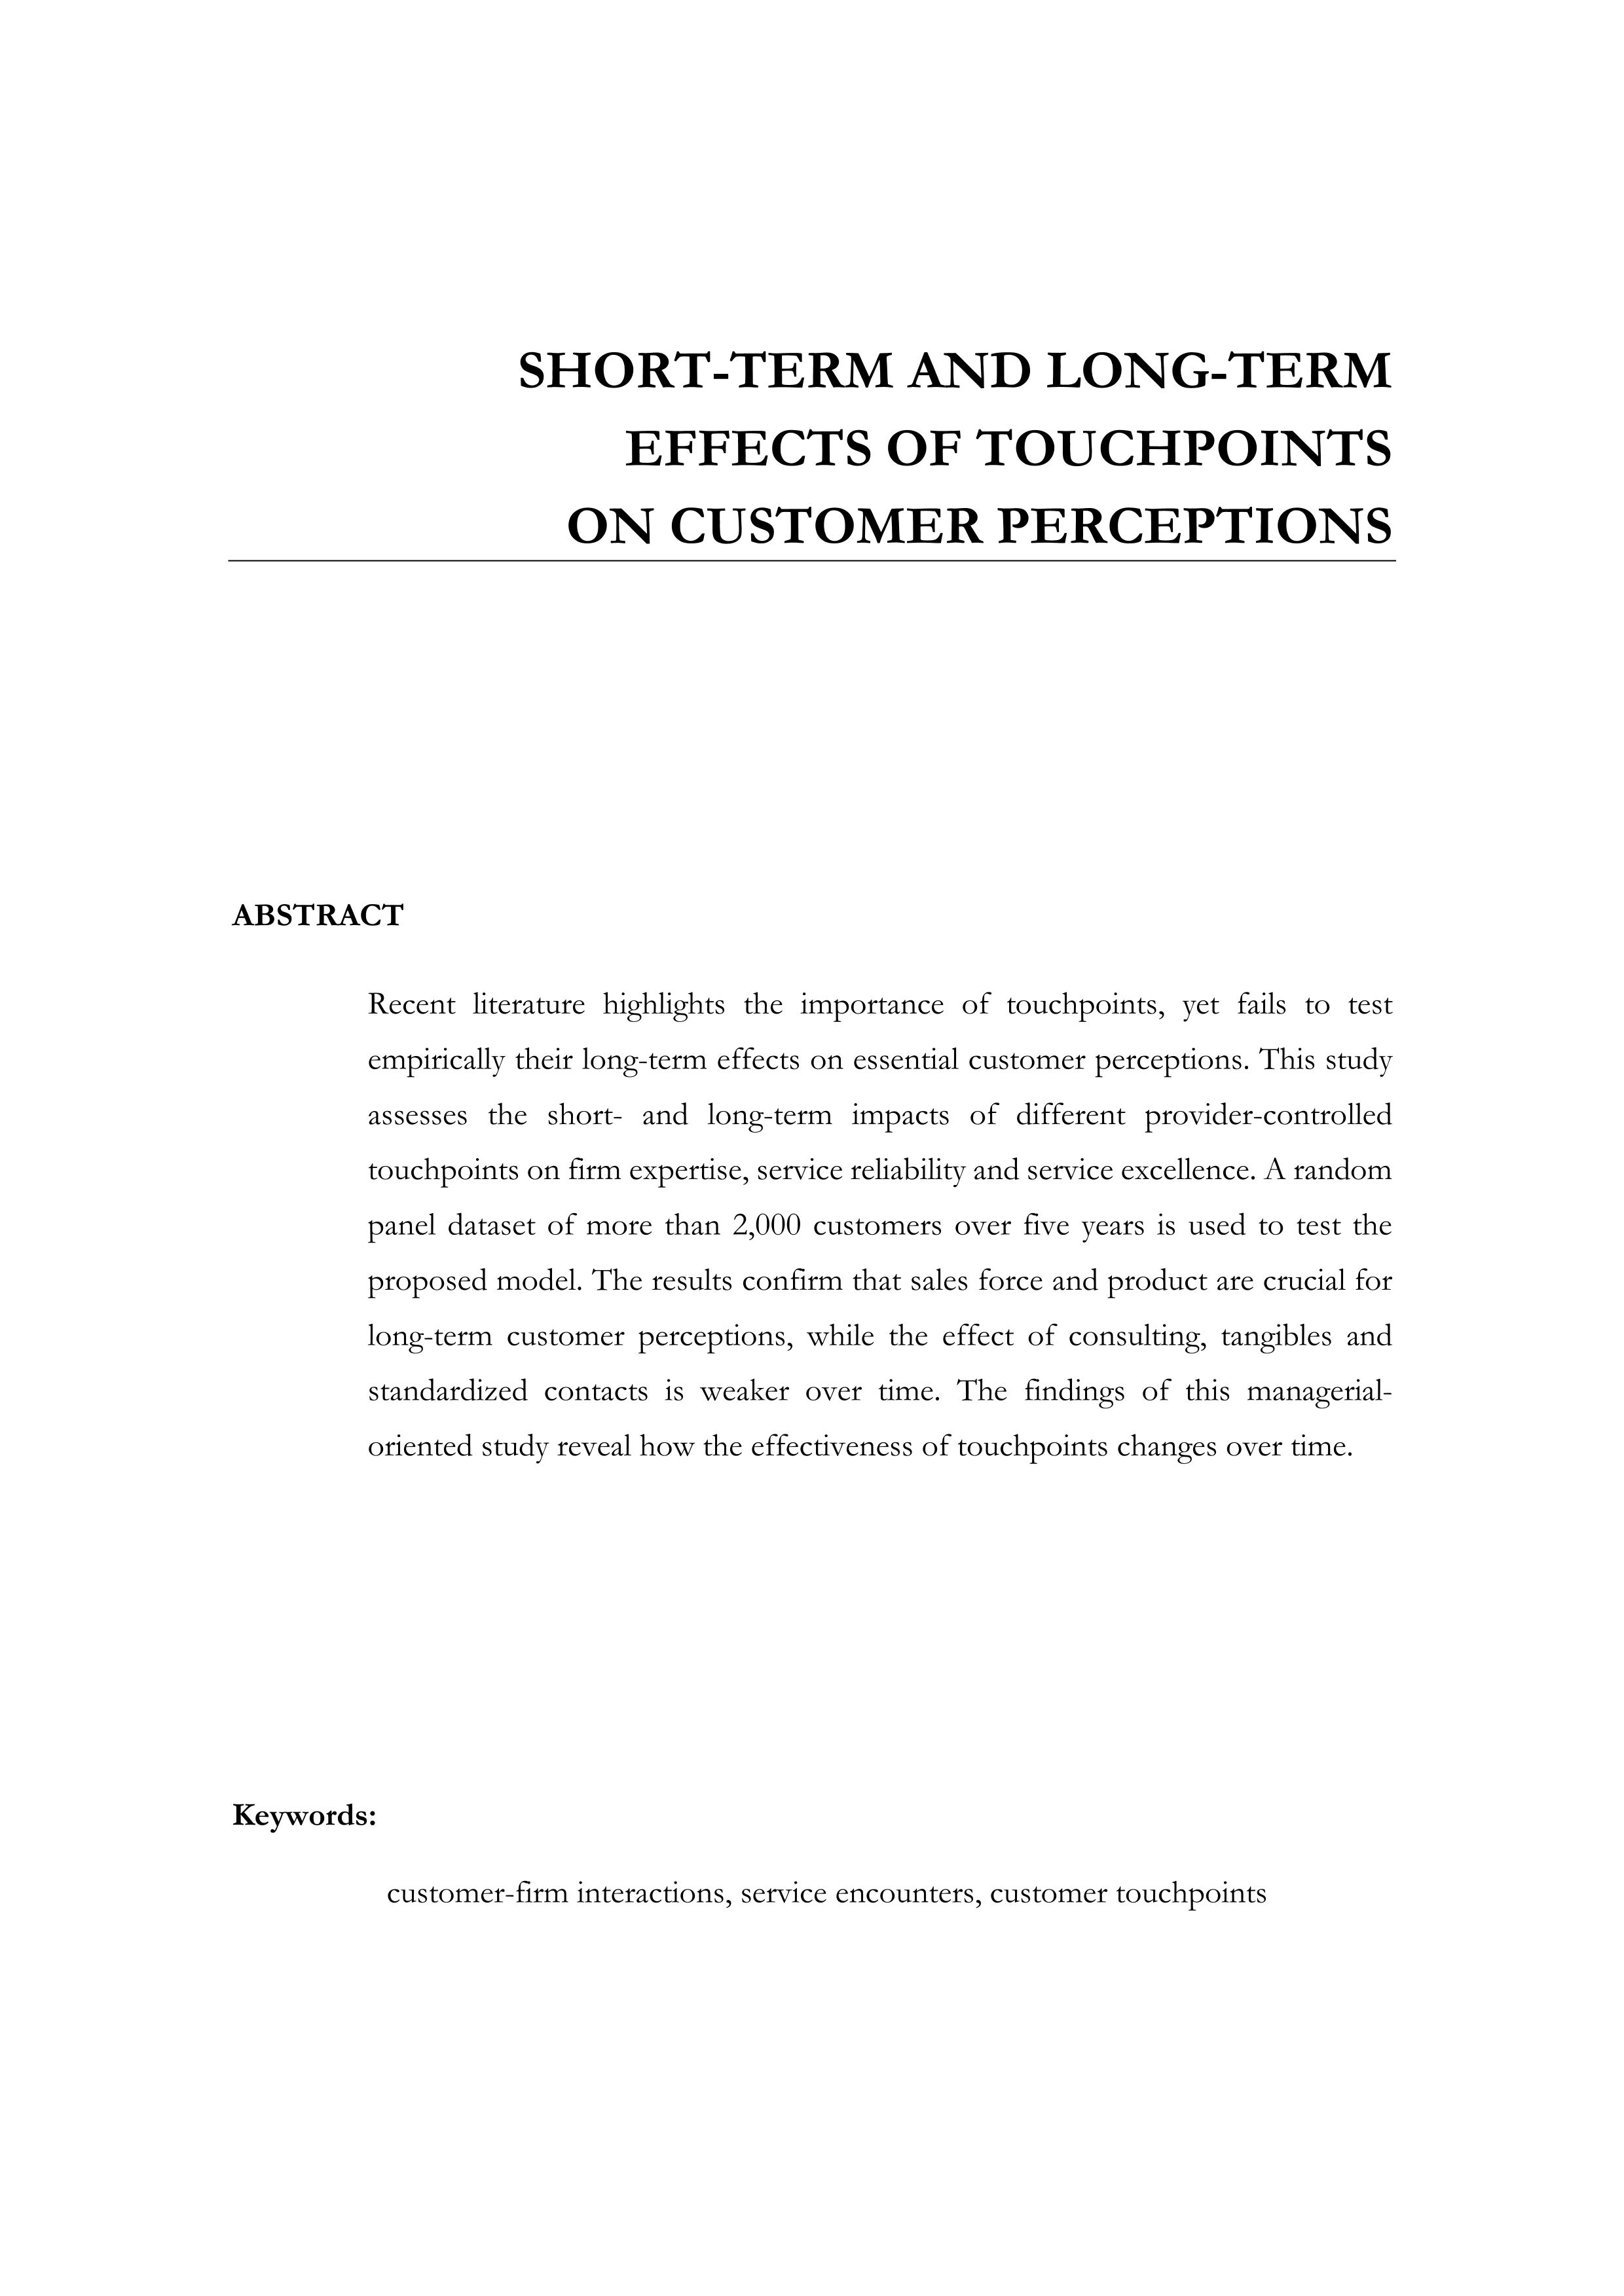 Short-term and long-term effects of touchpoints on customer perceptions